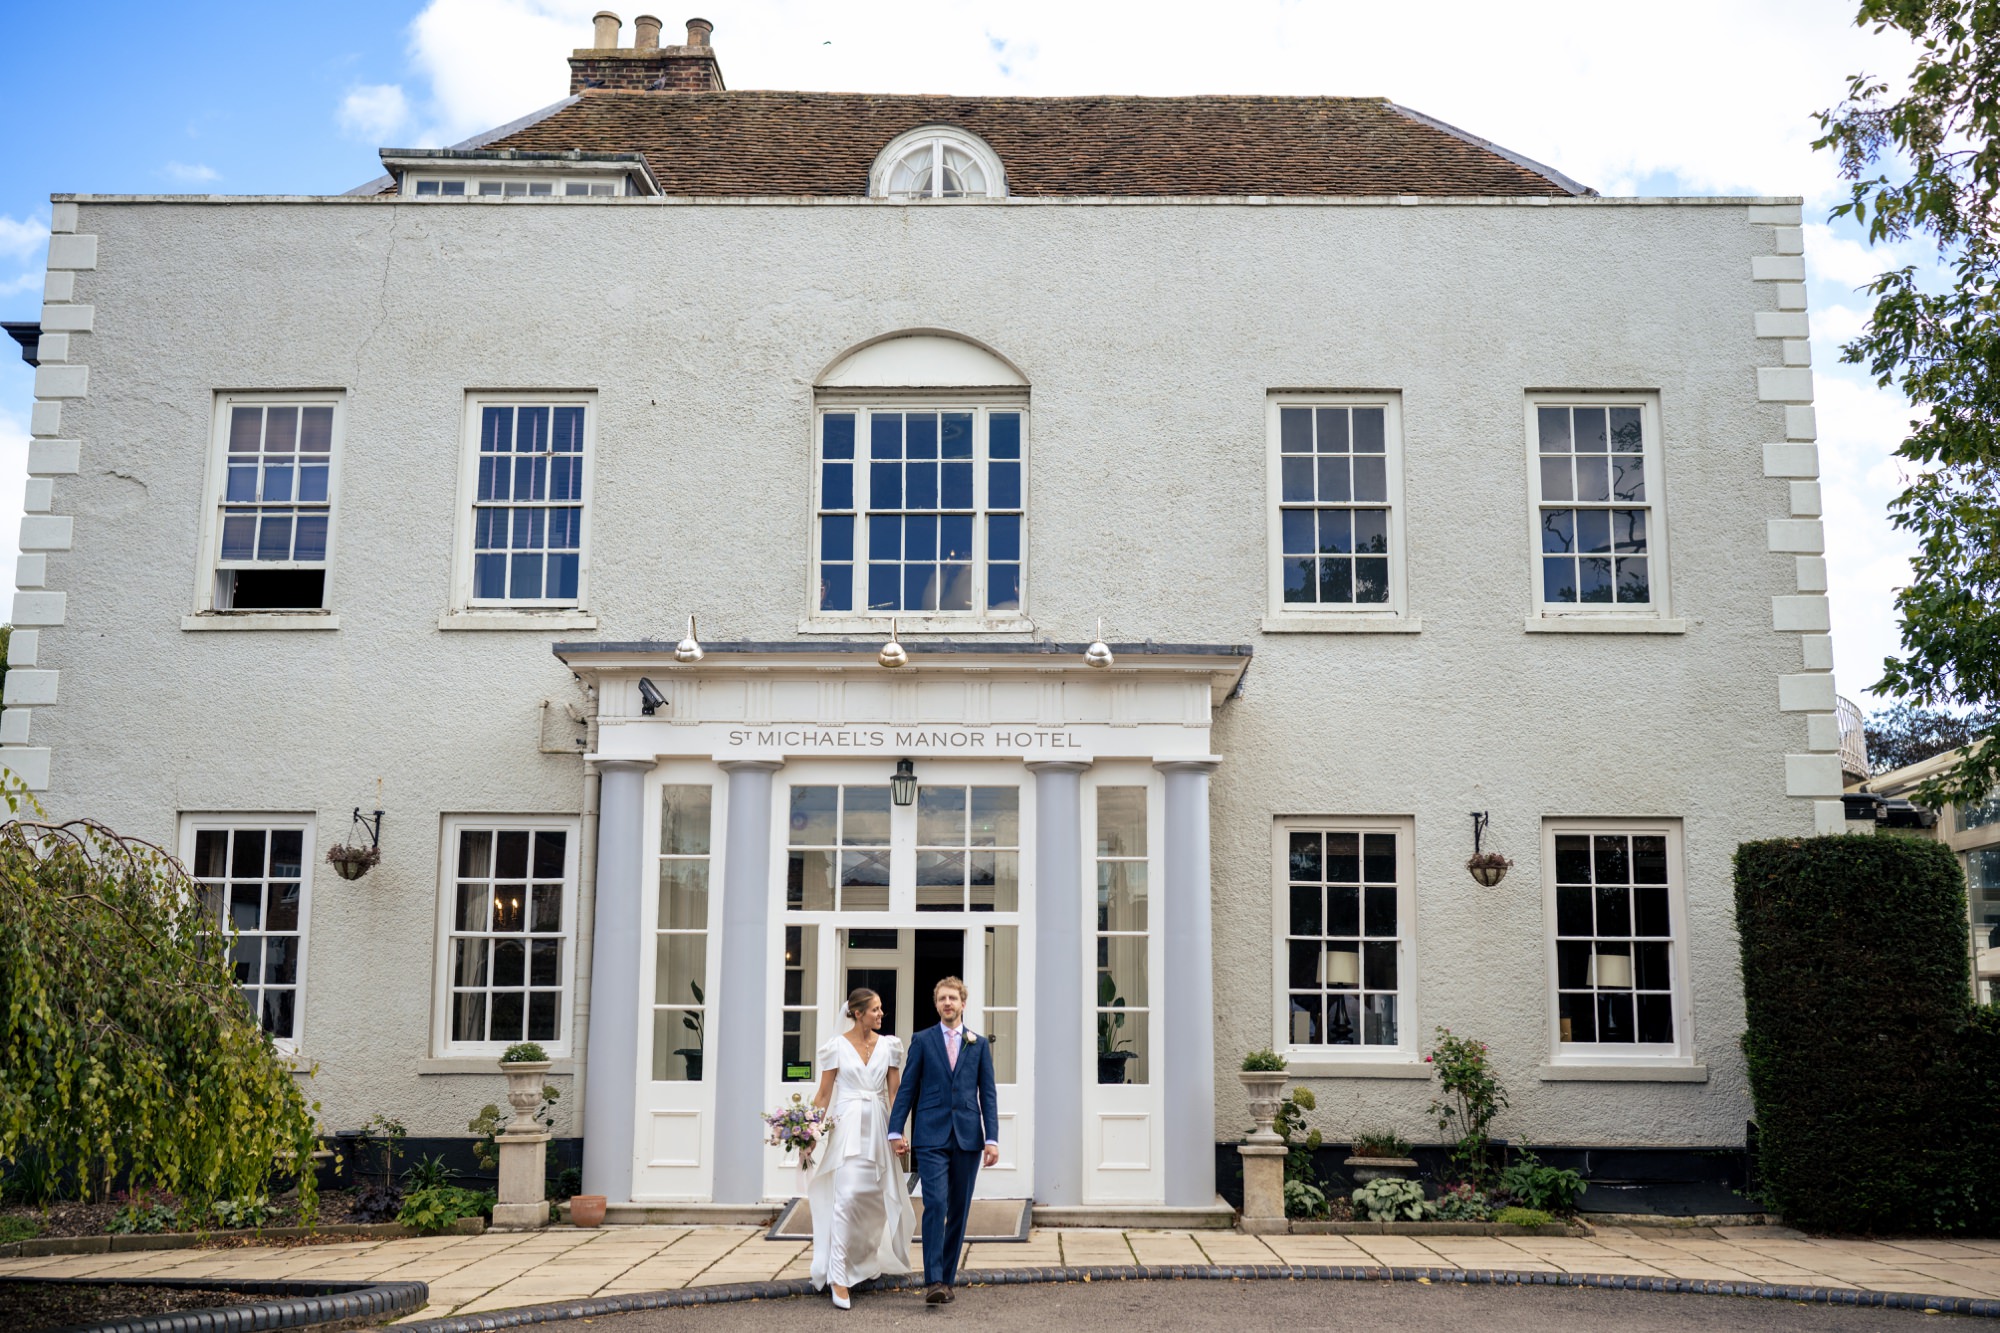 Bride and groom leave St Michael's Manor Hotel hand in hand in St Albans after their wedding ceremony